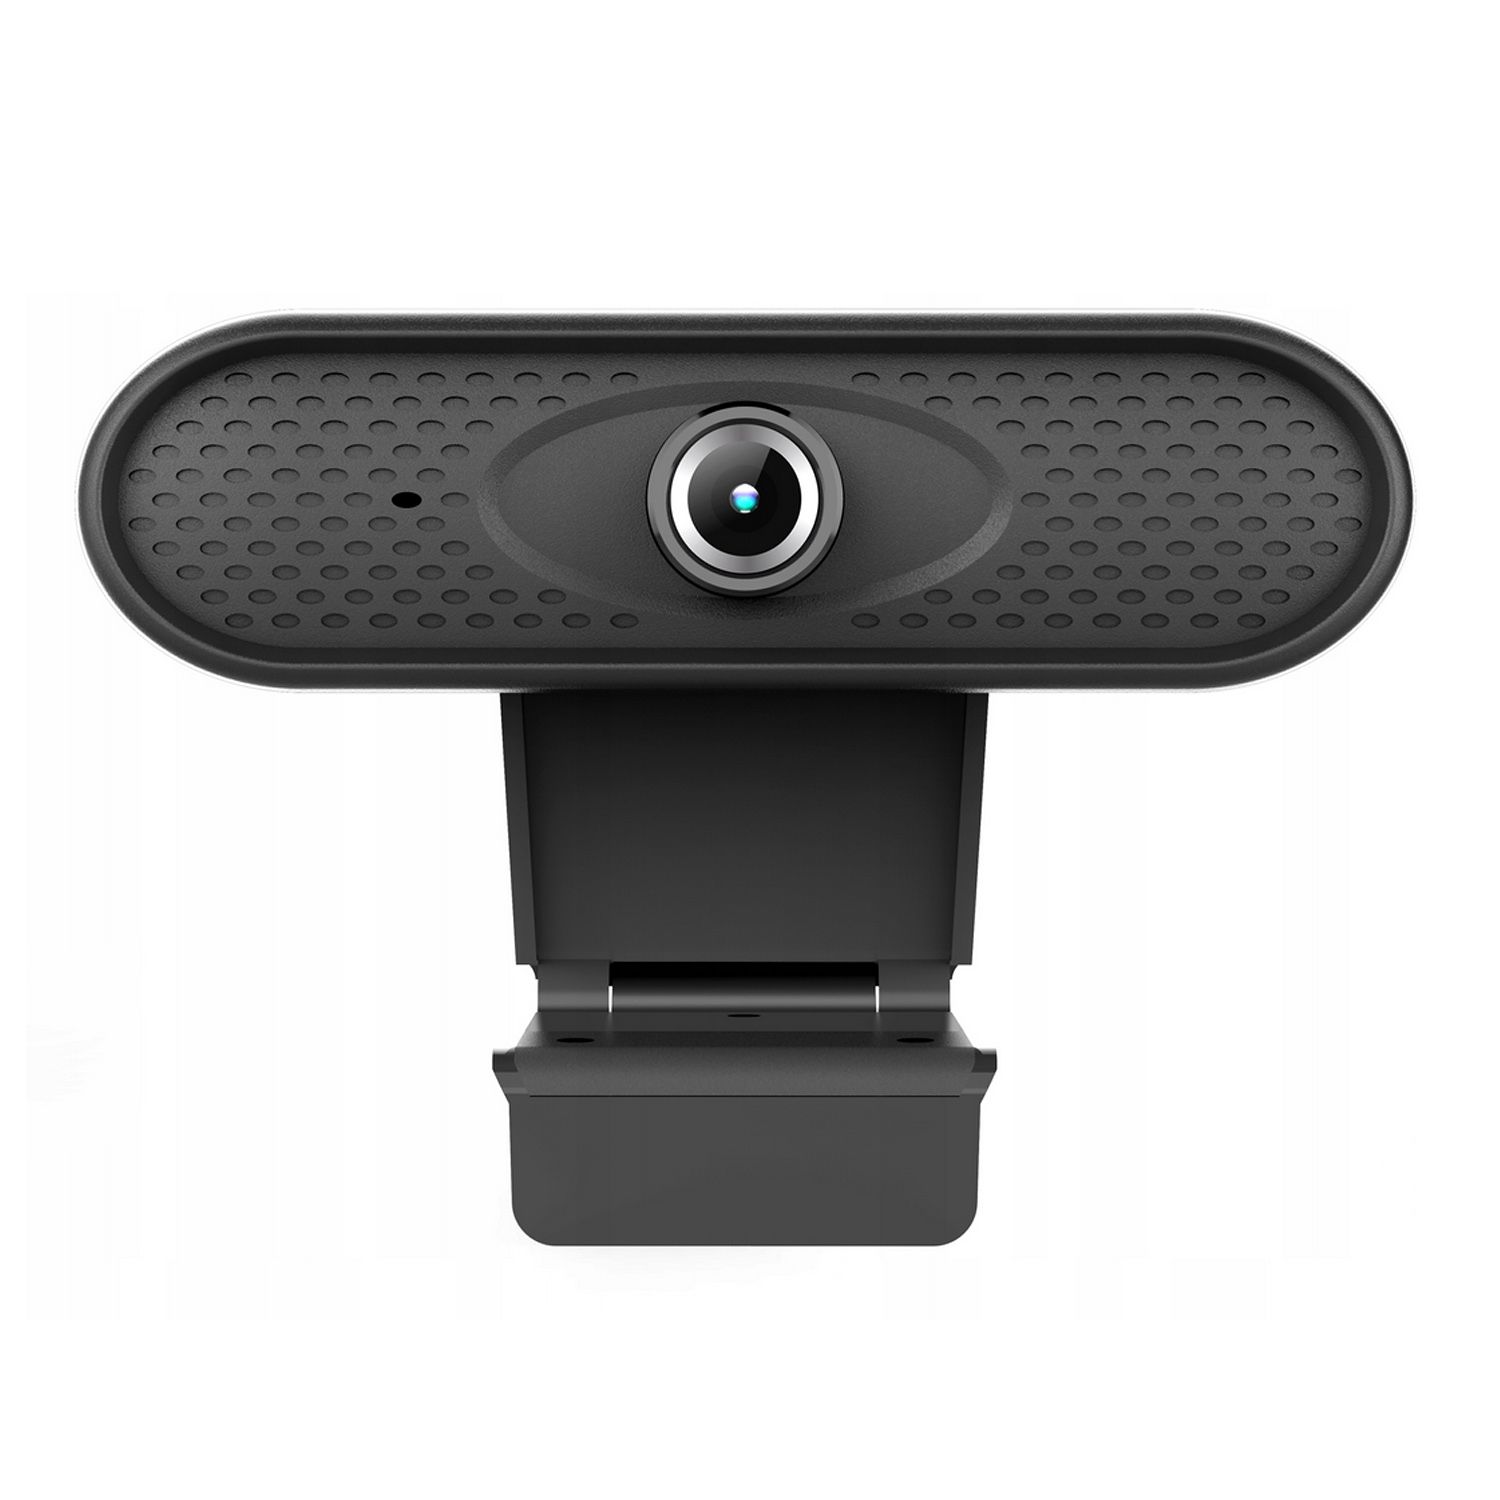 USB Nano RS RS680 HD 1080P (1920x1080) webcam with built-in microphone,_7